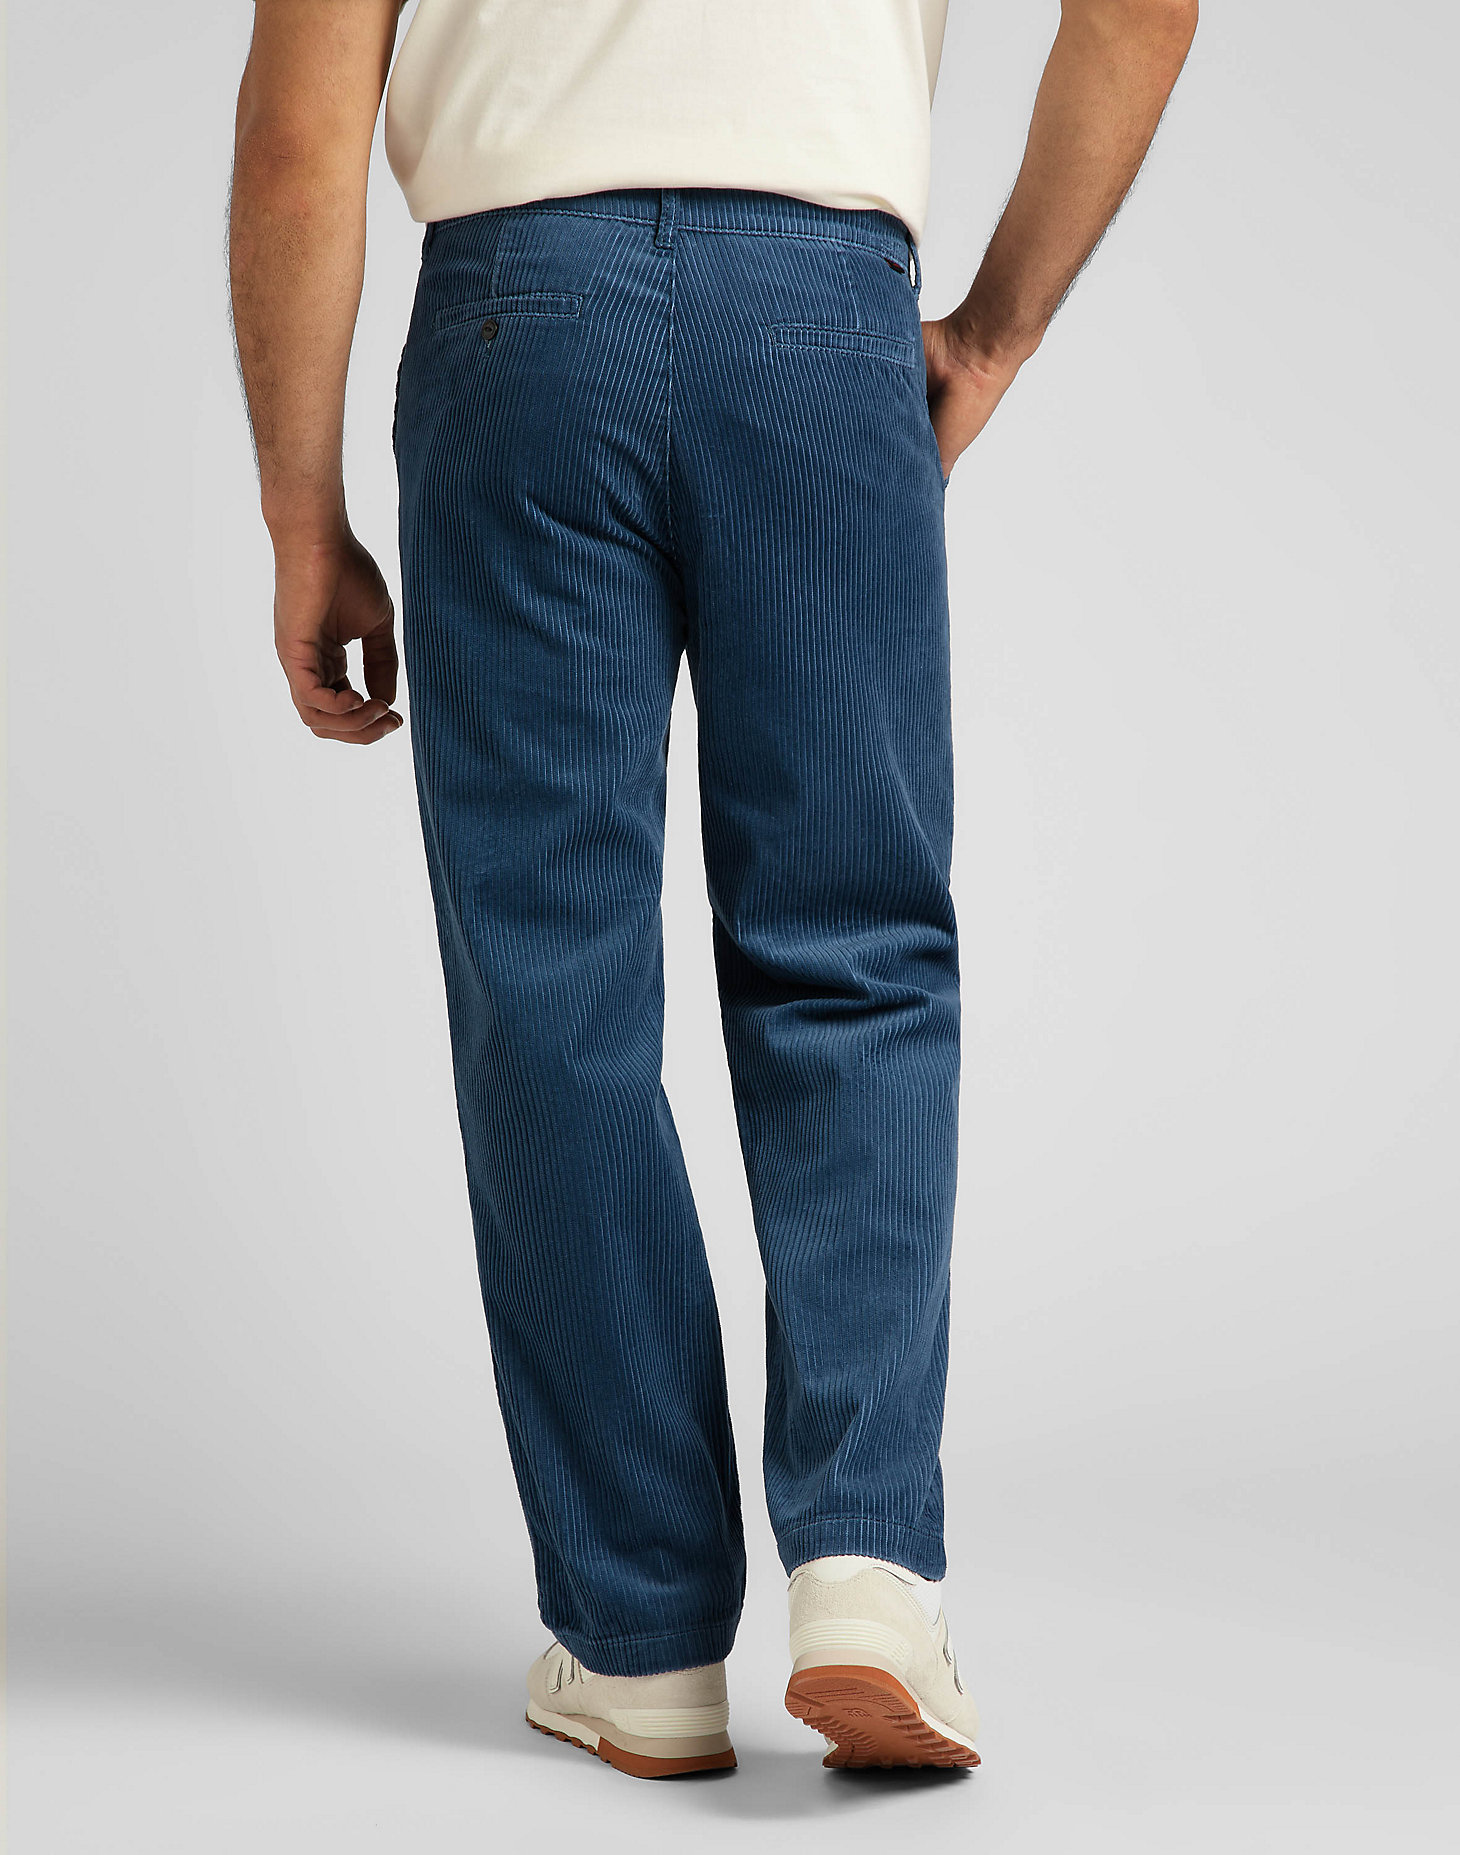 Relaxed Chino in Marine alternative view 1